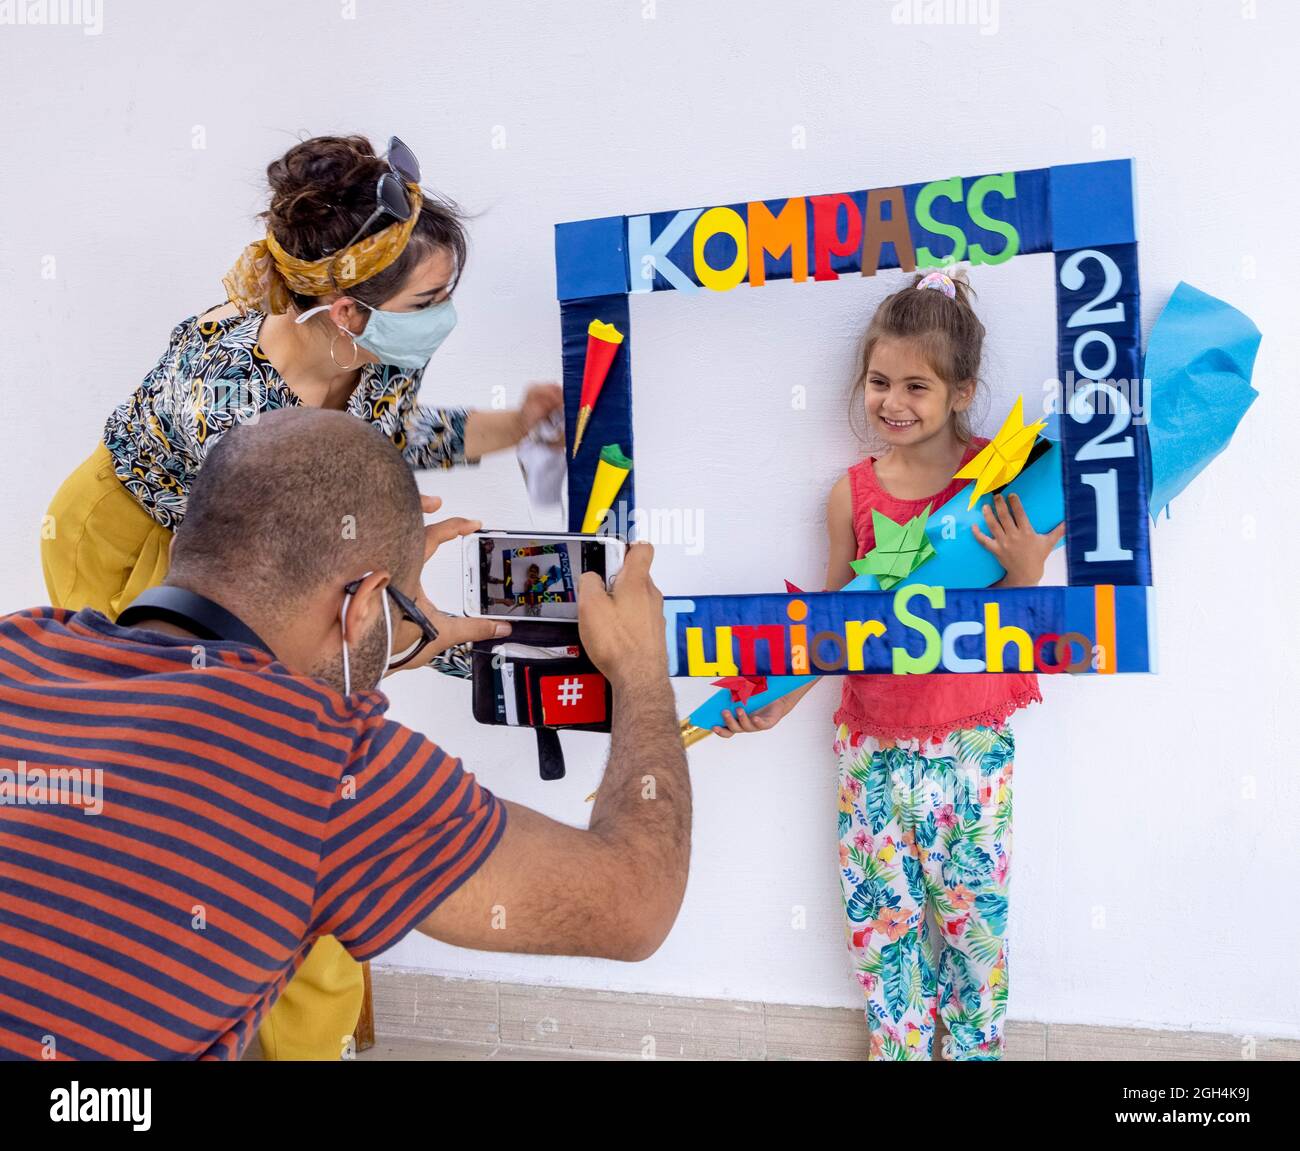 parents photographing girl receiving traditional German school cone on first day of school, Kompass International School, Cairo, Egypt Stock Photo